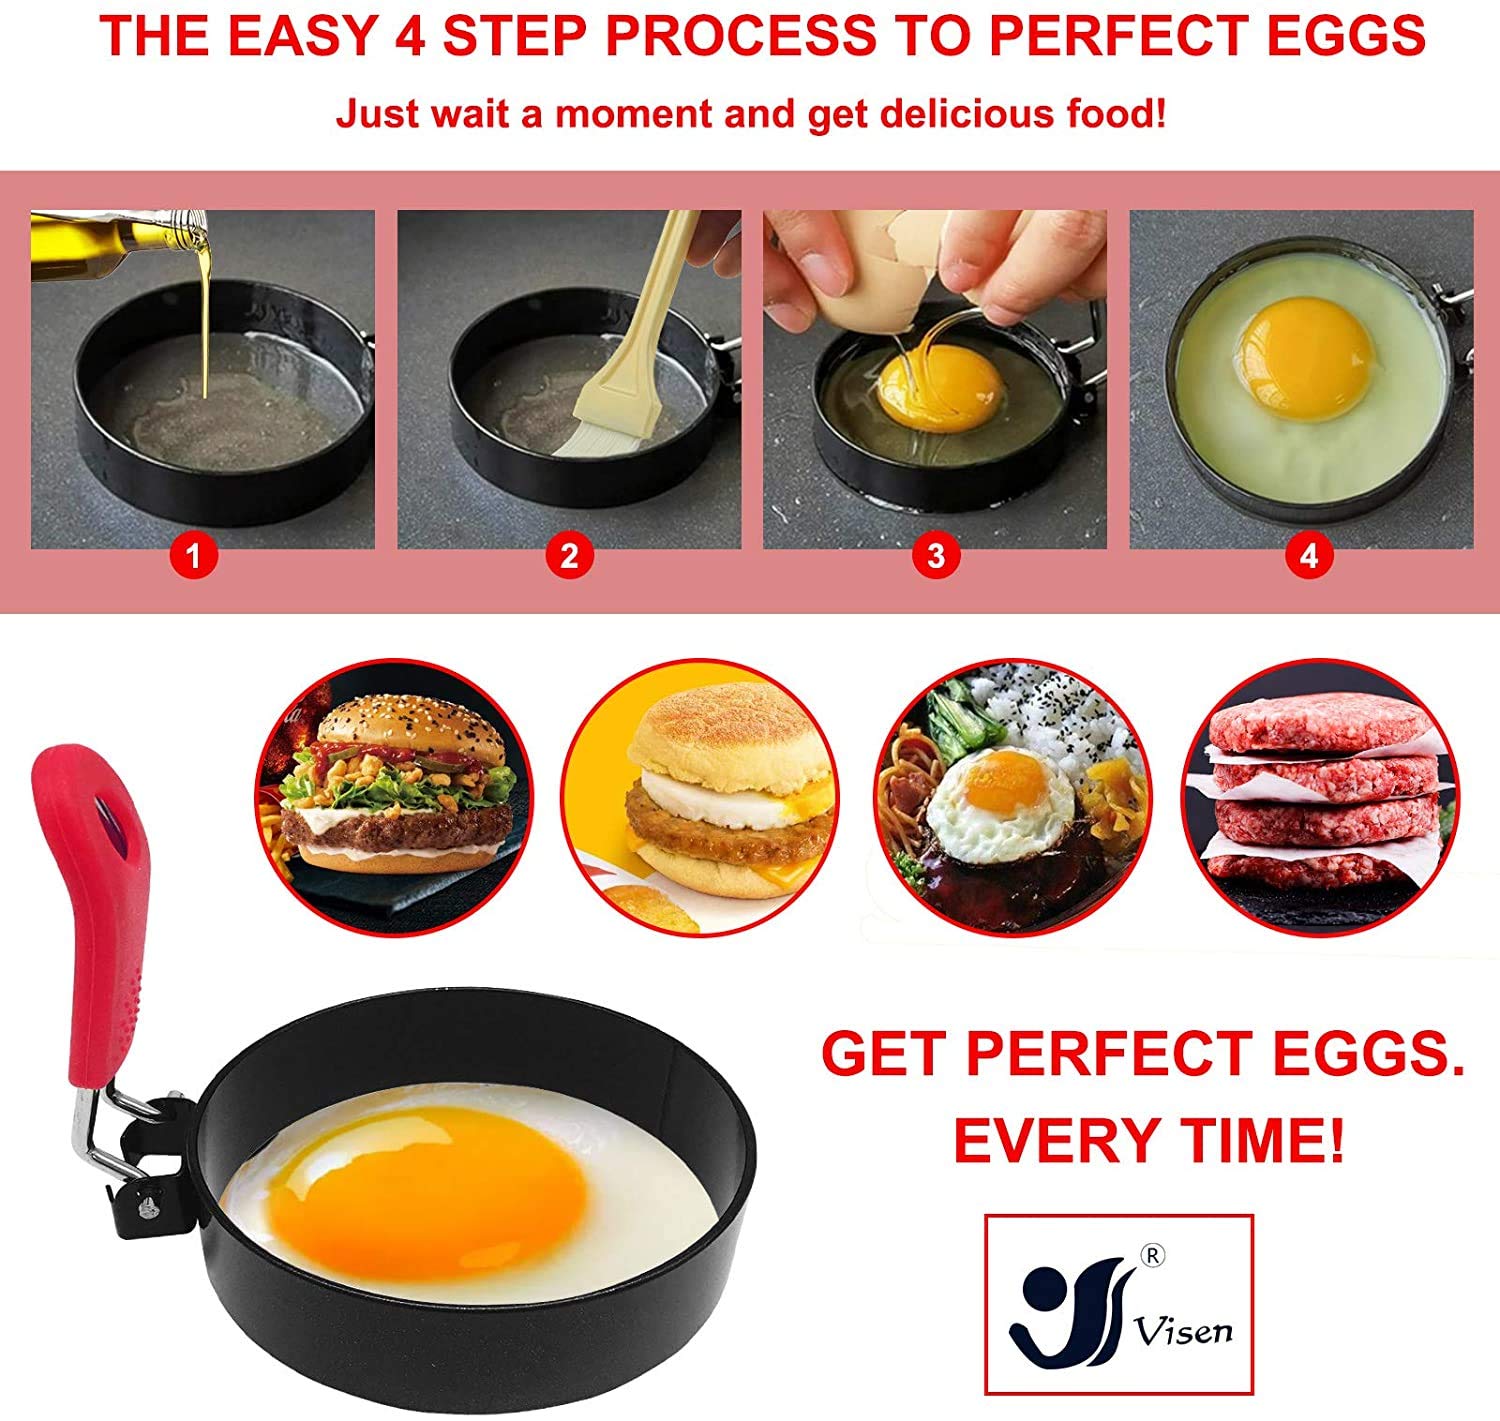 Egg Ring 4-Pack Stainless Steel Egg Ring with Anti-scald Handle with an Oil Brush Non Stick Coating Breakfast Tool for Eggs Frying/Shaping